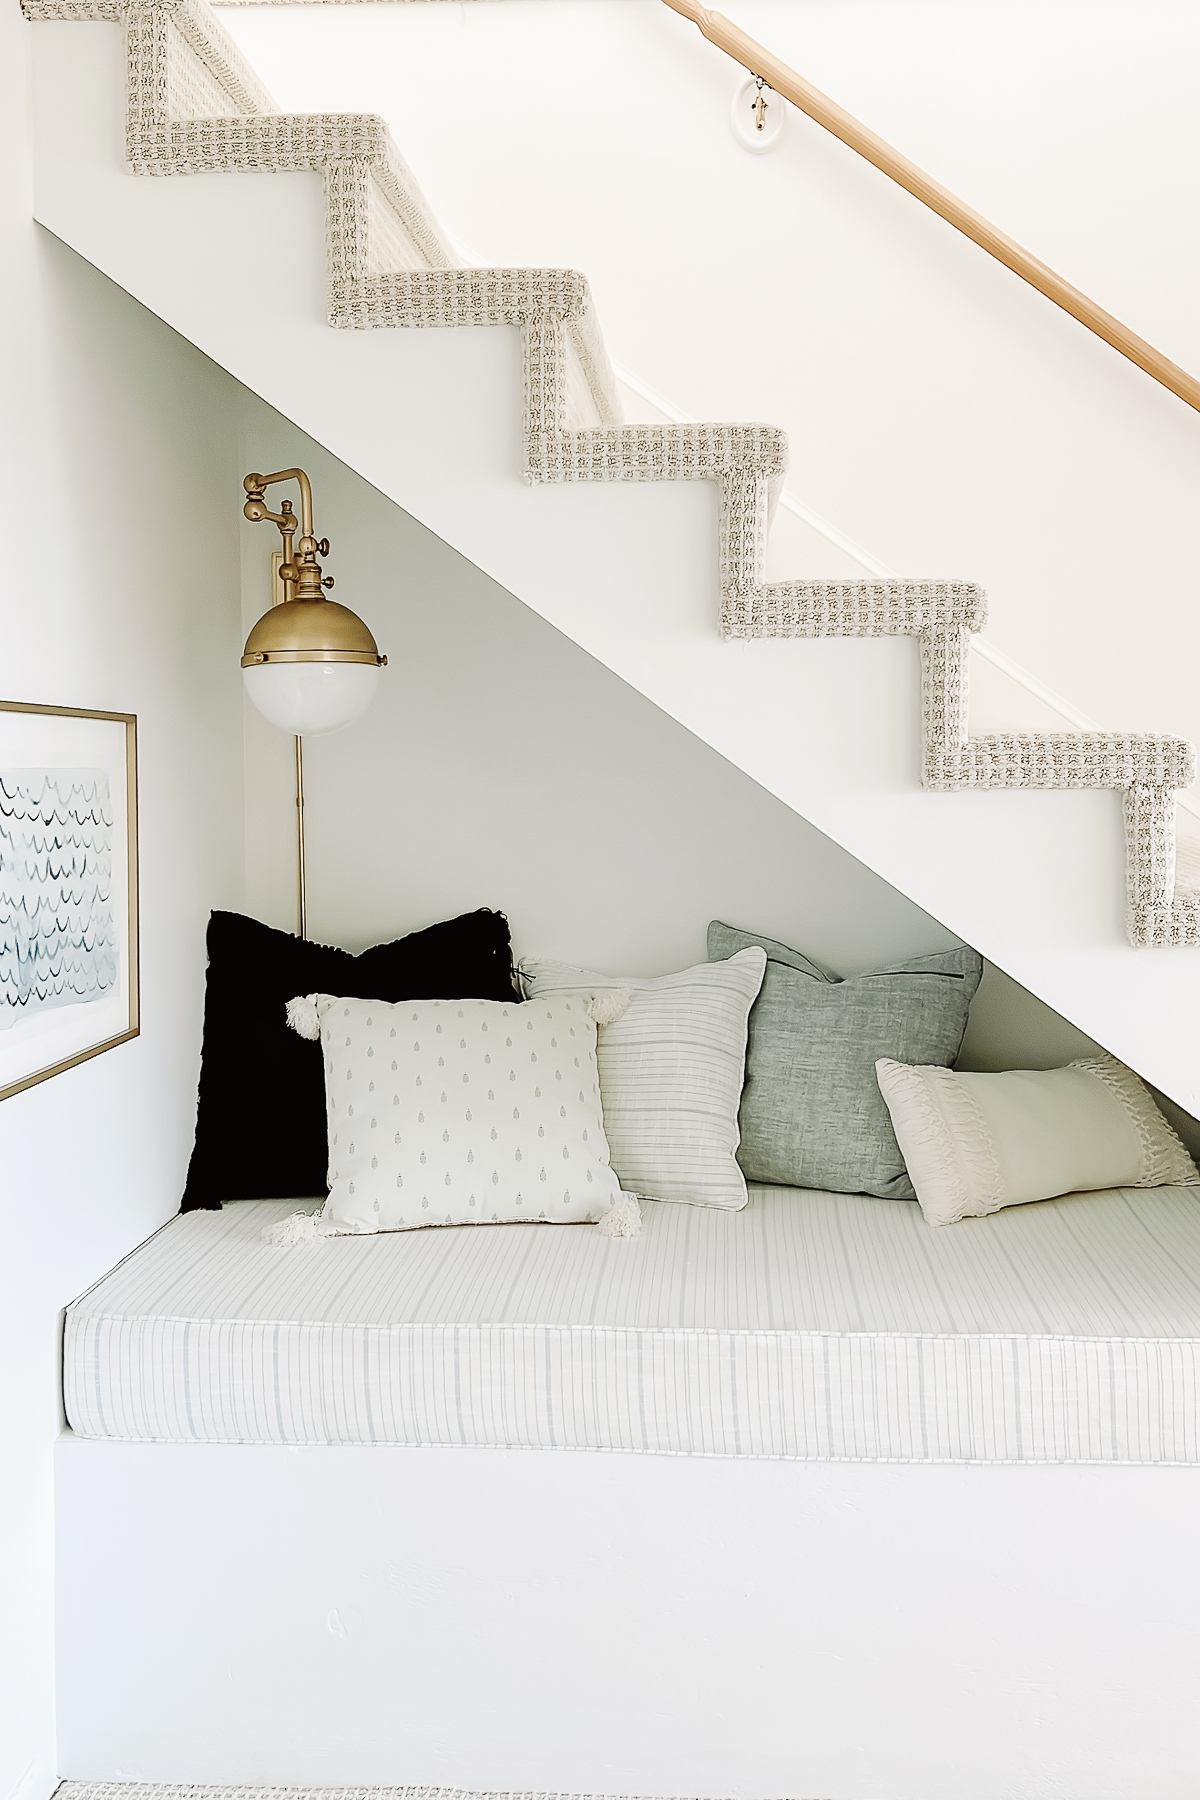 nook under an open staircase featuring a space for reading or sleeping, lots of blue and white pillows and a brass sconce